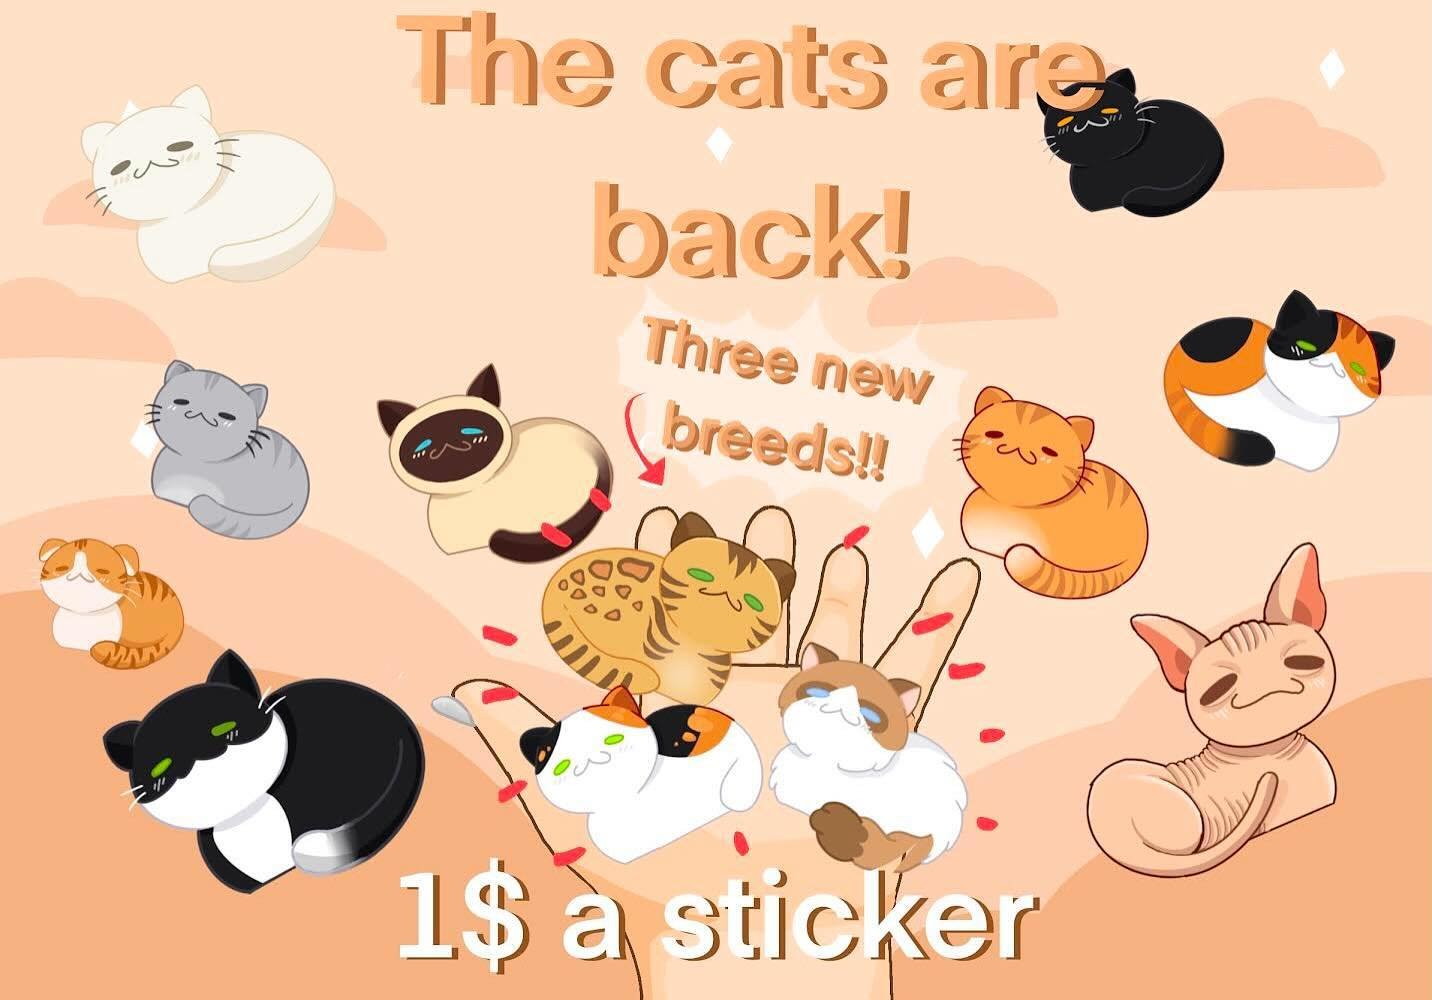 Come see Dae&rsquo;Ja&rsquo;s booth at tonight&rsquo;s Art Market to purchase these cute cat stickers for $1 each